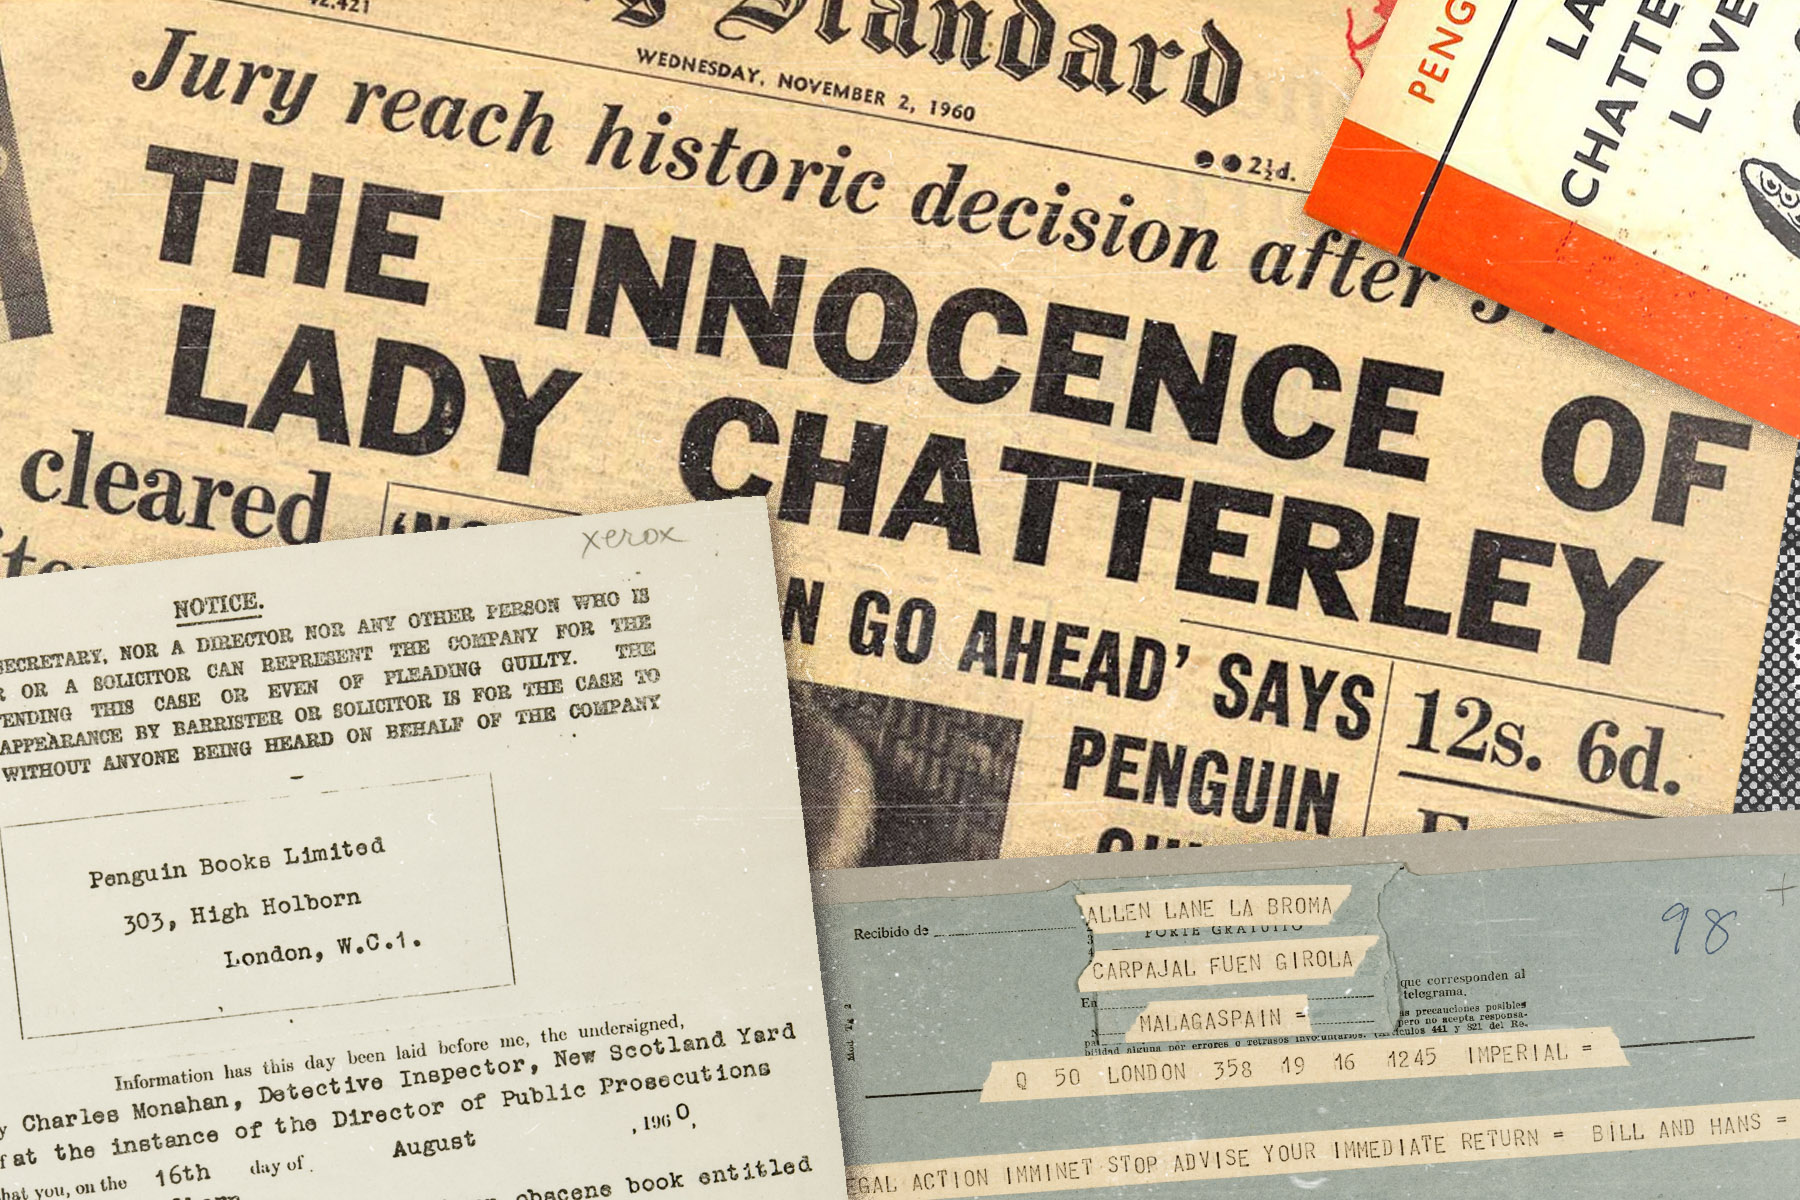 How the Lady Chatterley’s Lover trial still resonates 60 years later